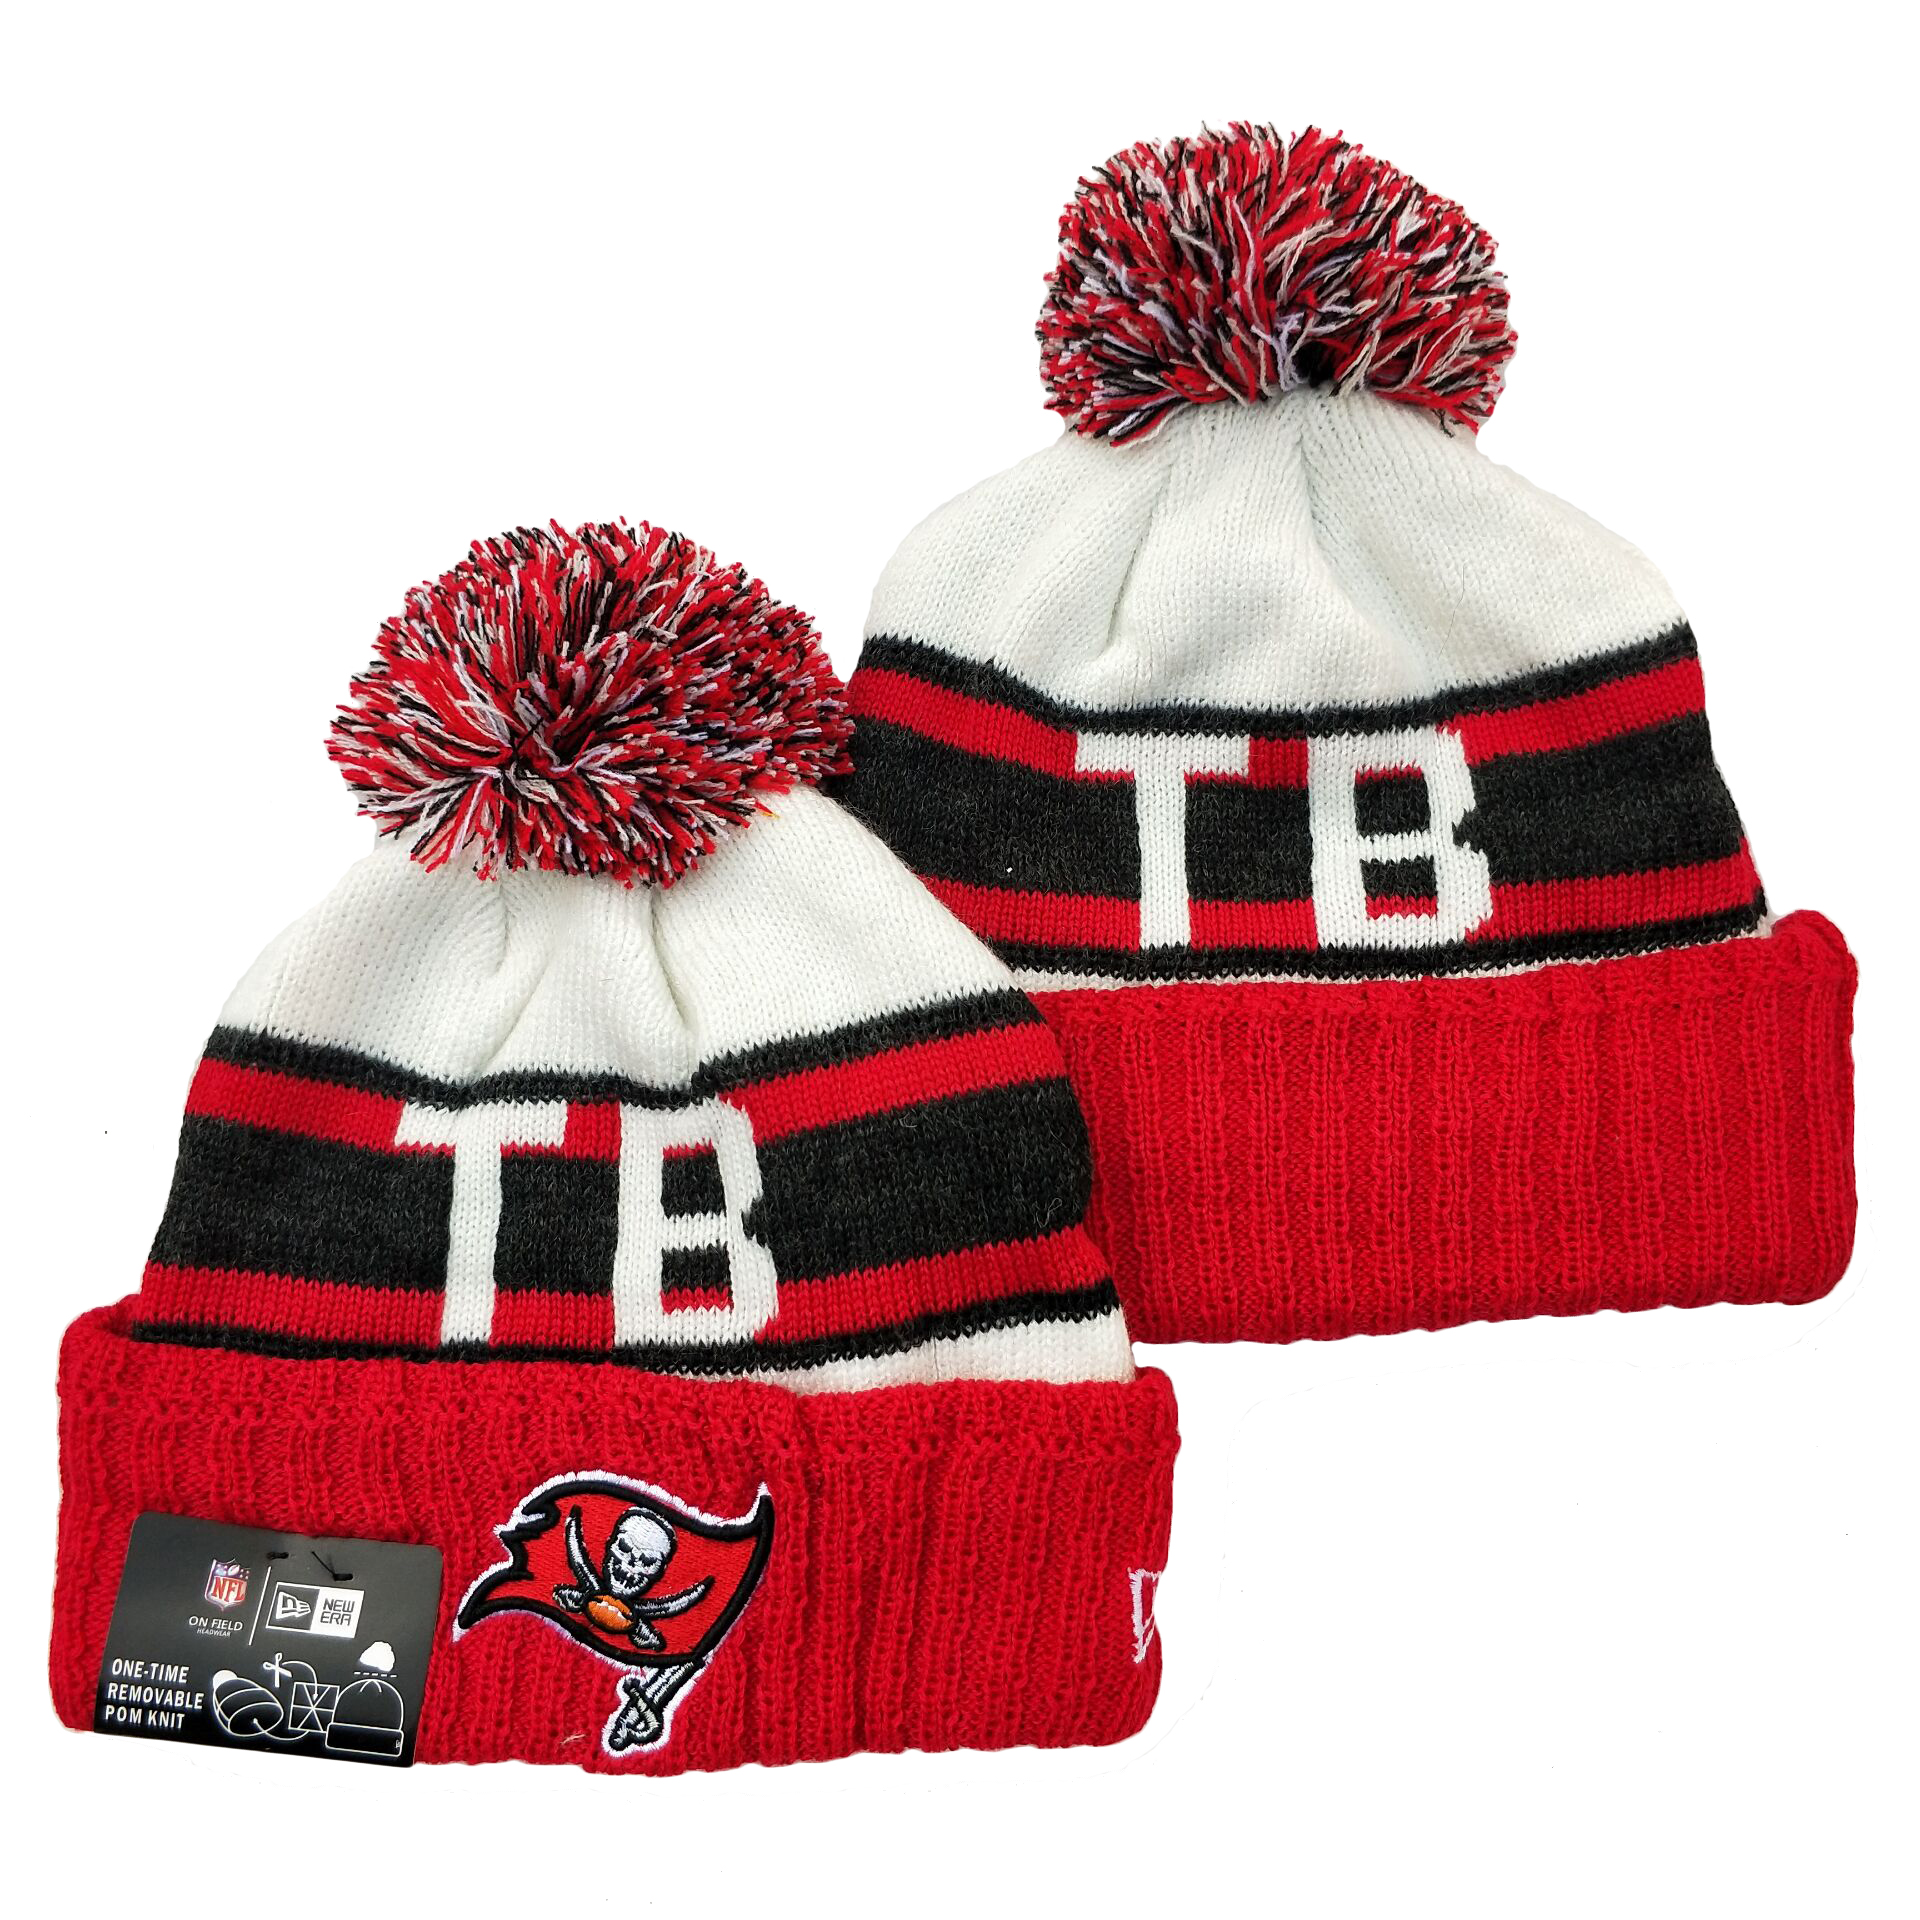 Tampa Bay Buccaneers Knit Hats 032